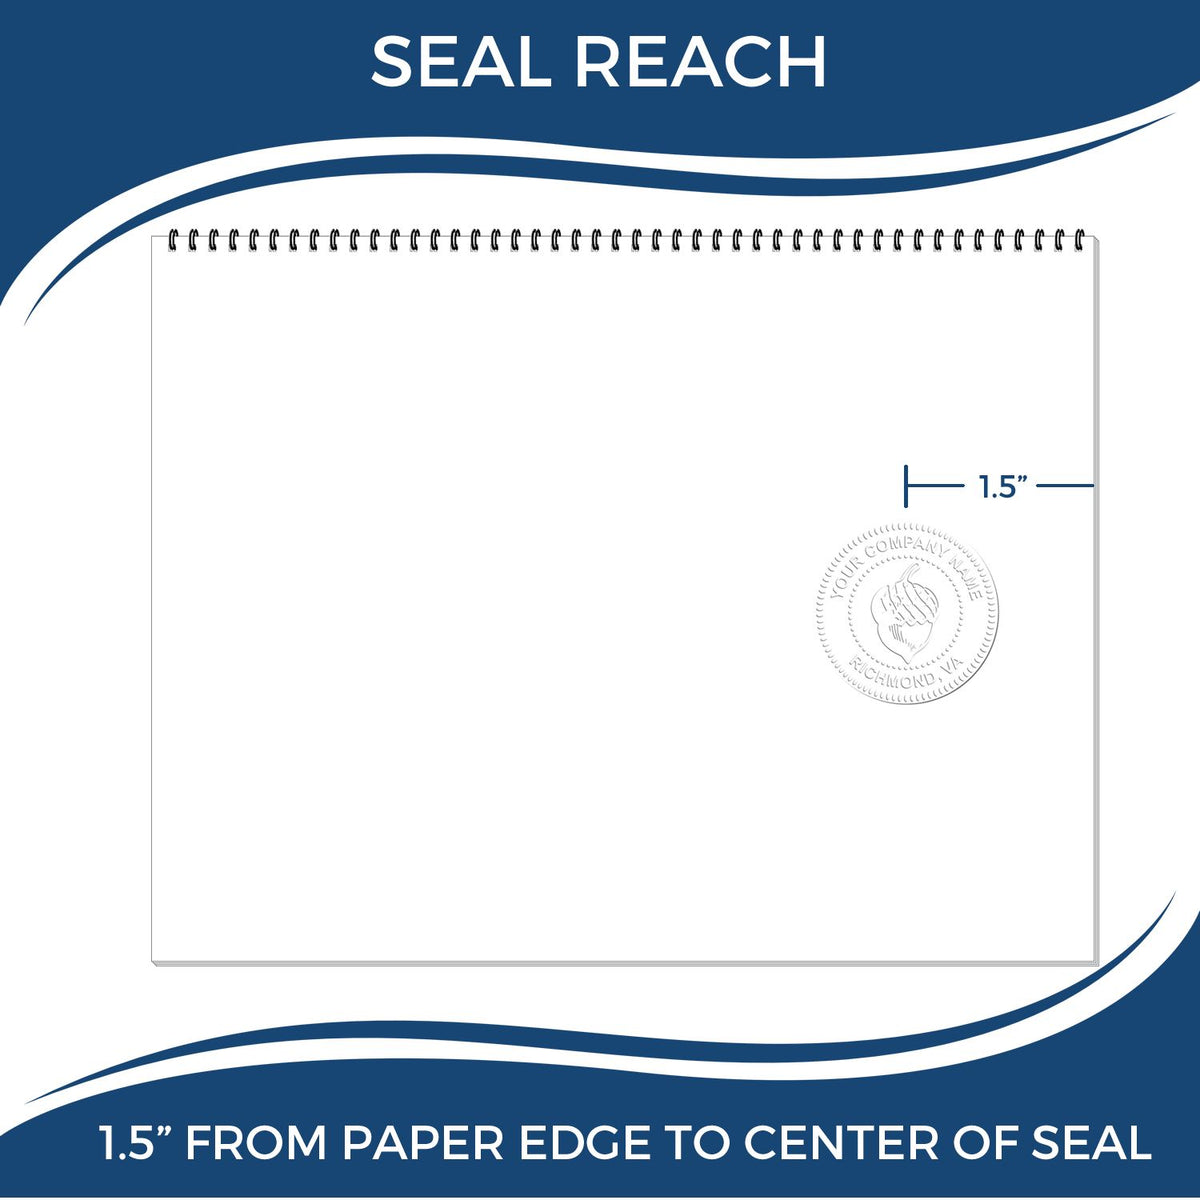 An infographic showing the seal reach which is represented by a ruler and a miniature seal image of the State of Louisiana Architectural Seal Embosser